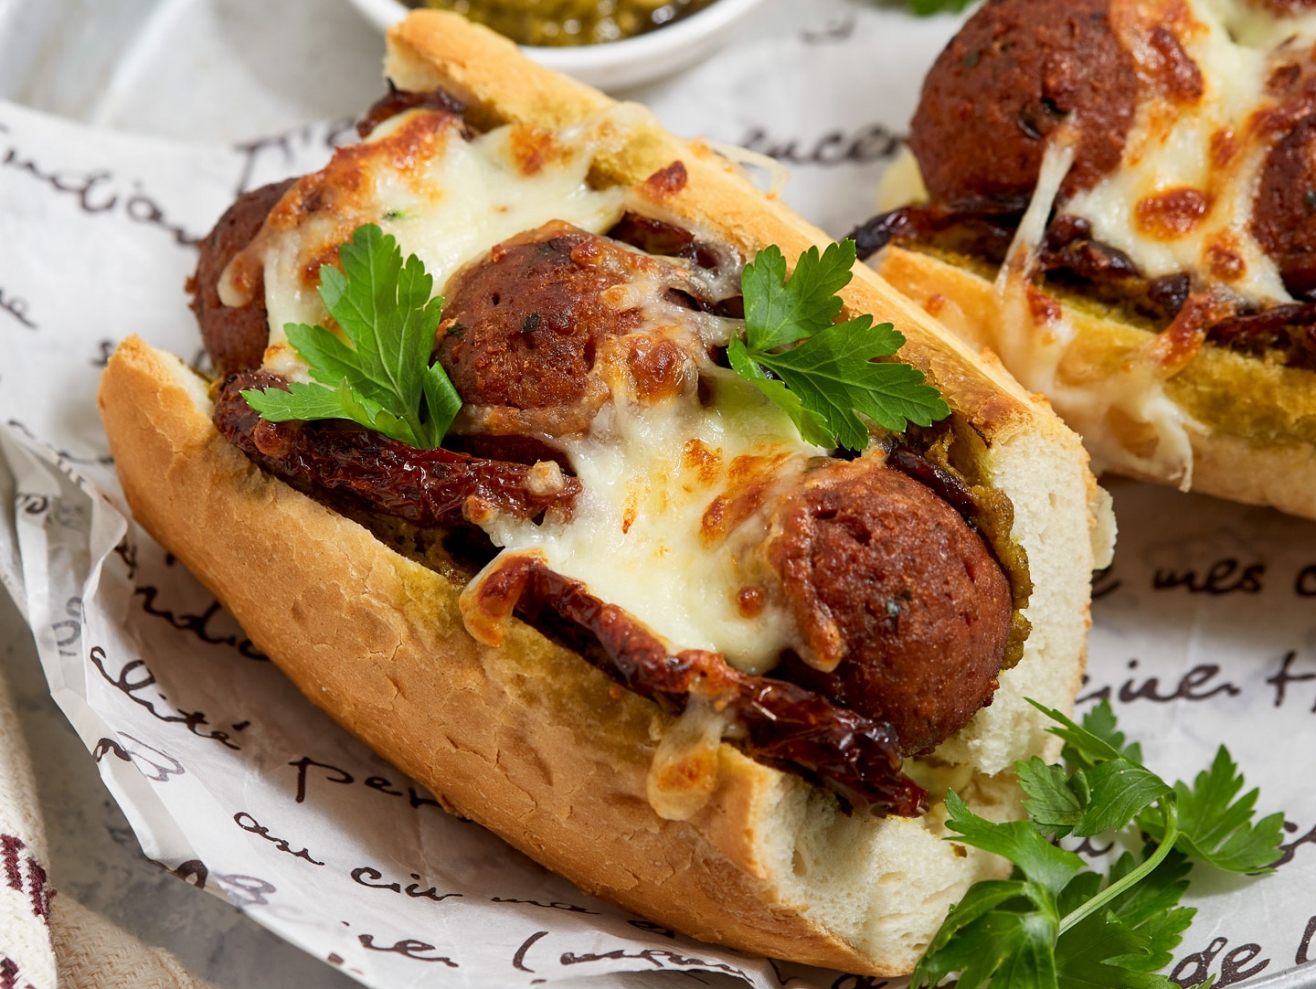 Sub sandwiches with meatballs Eat me at